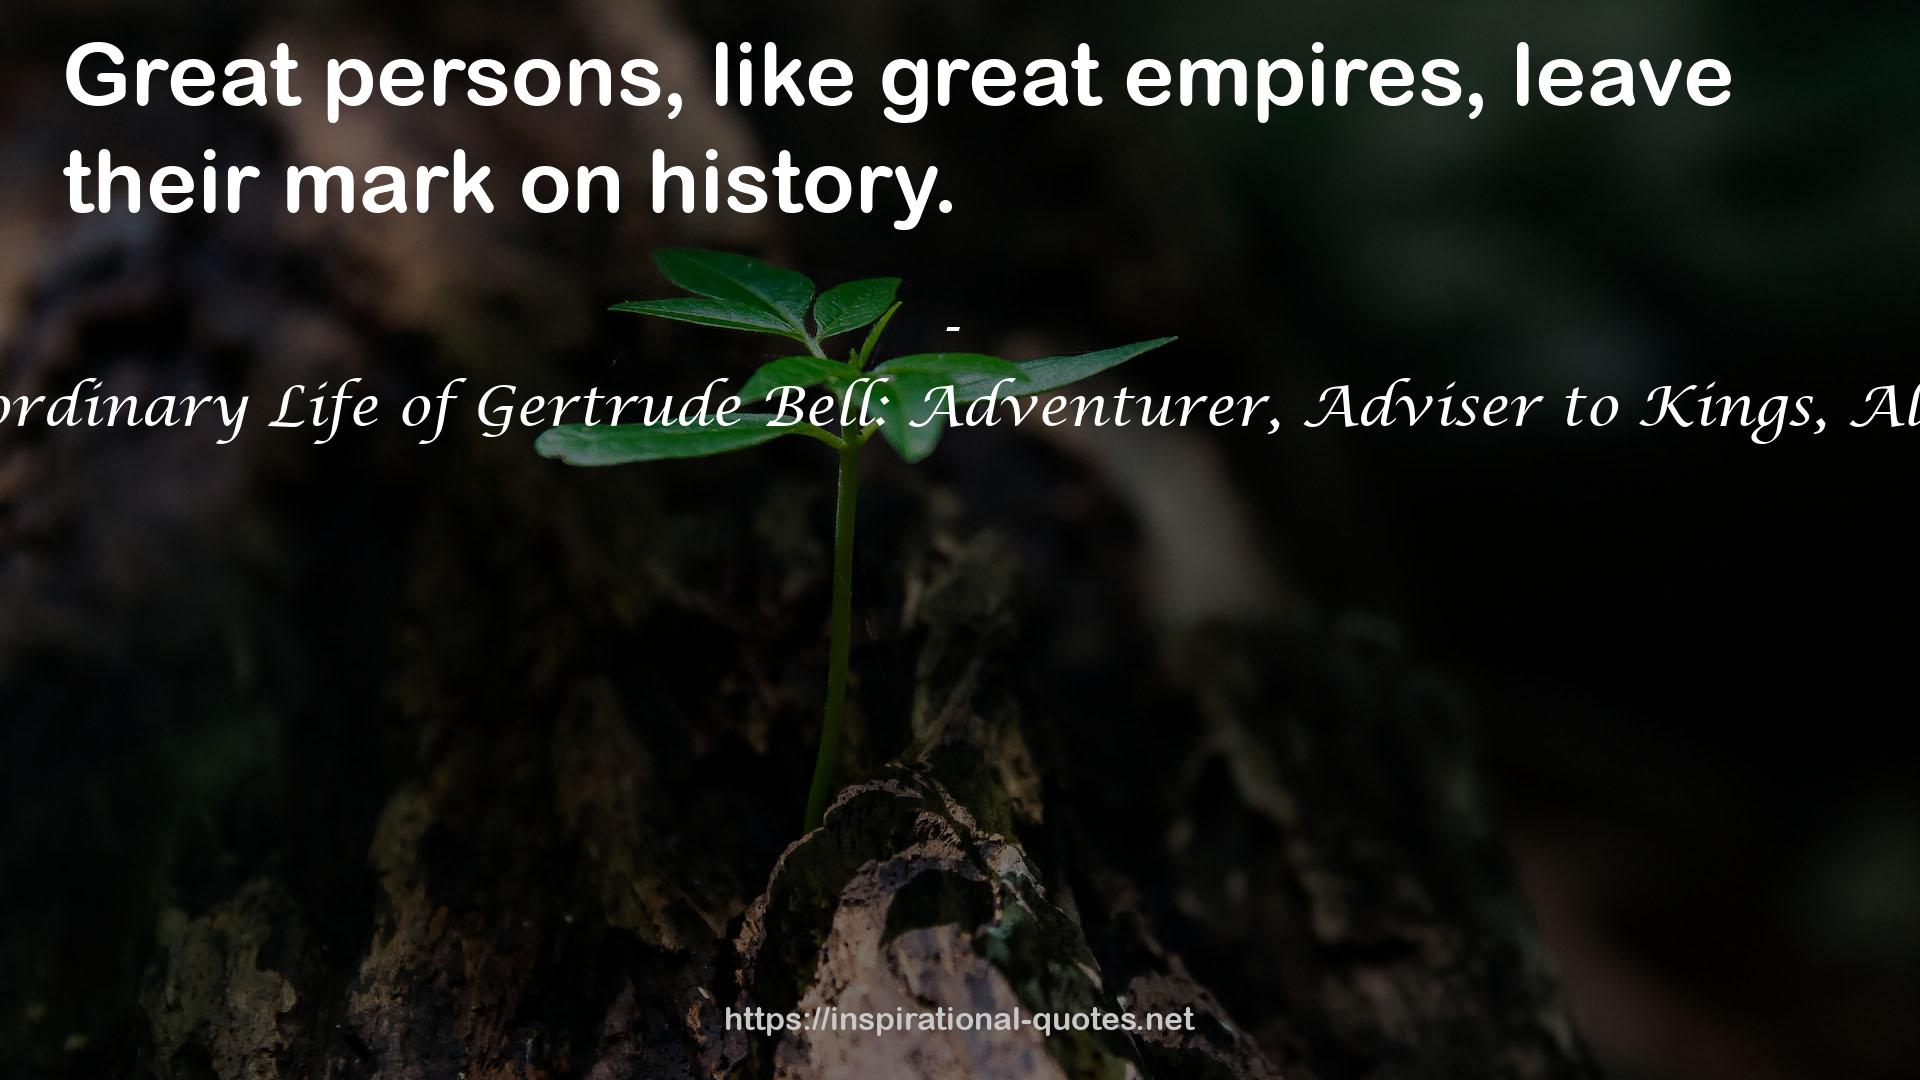 Desert Queen: The Extraordinary Life of Gertrude Bell: Adventurer, Adviser to Kings, Ally of Lawrence of Arabia QUOTES